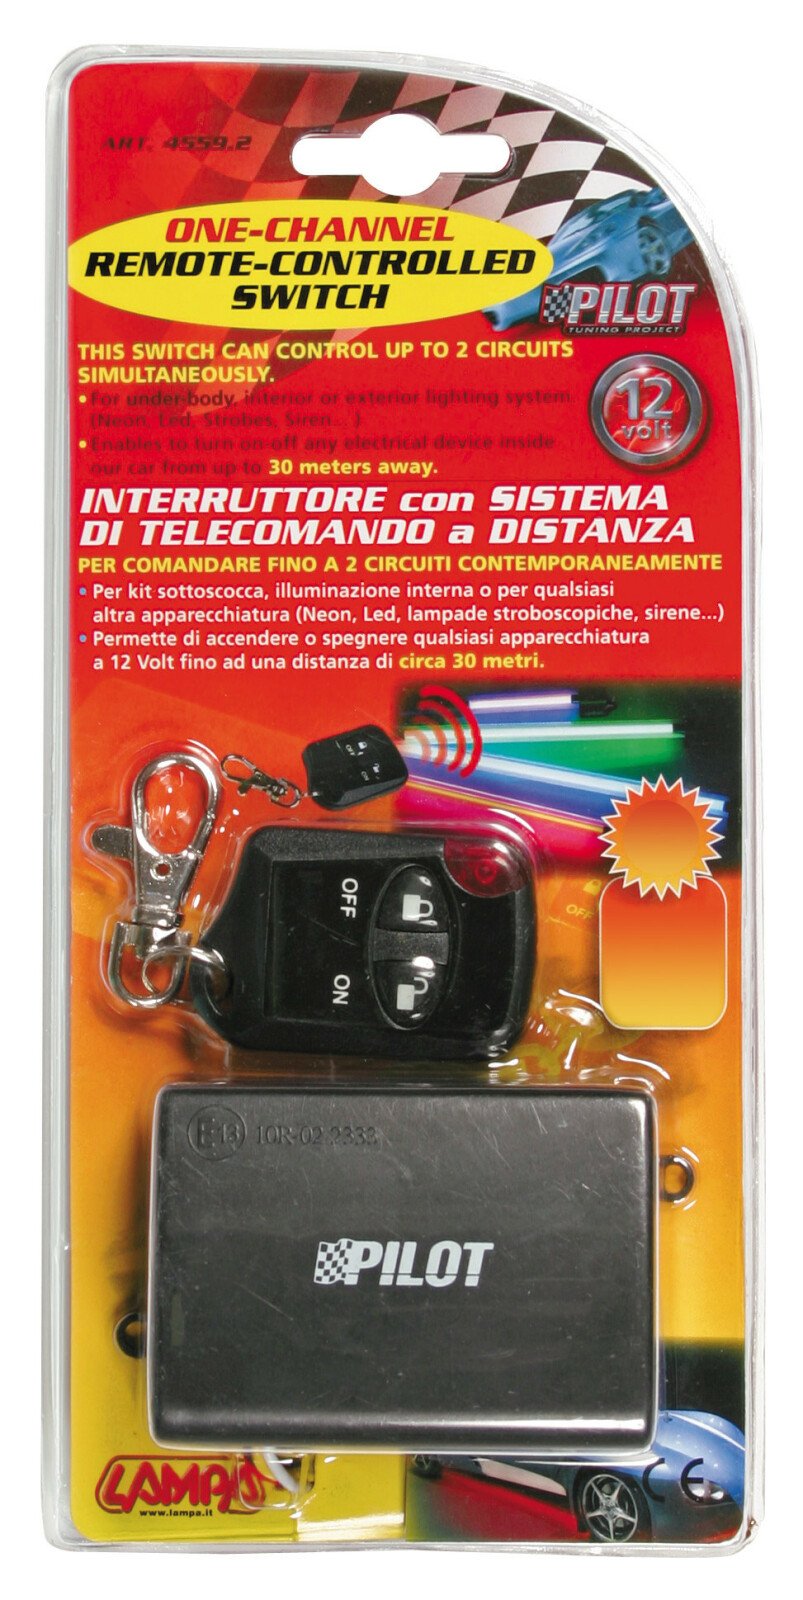 One-channel remote-controlled switch, 12V thumb